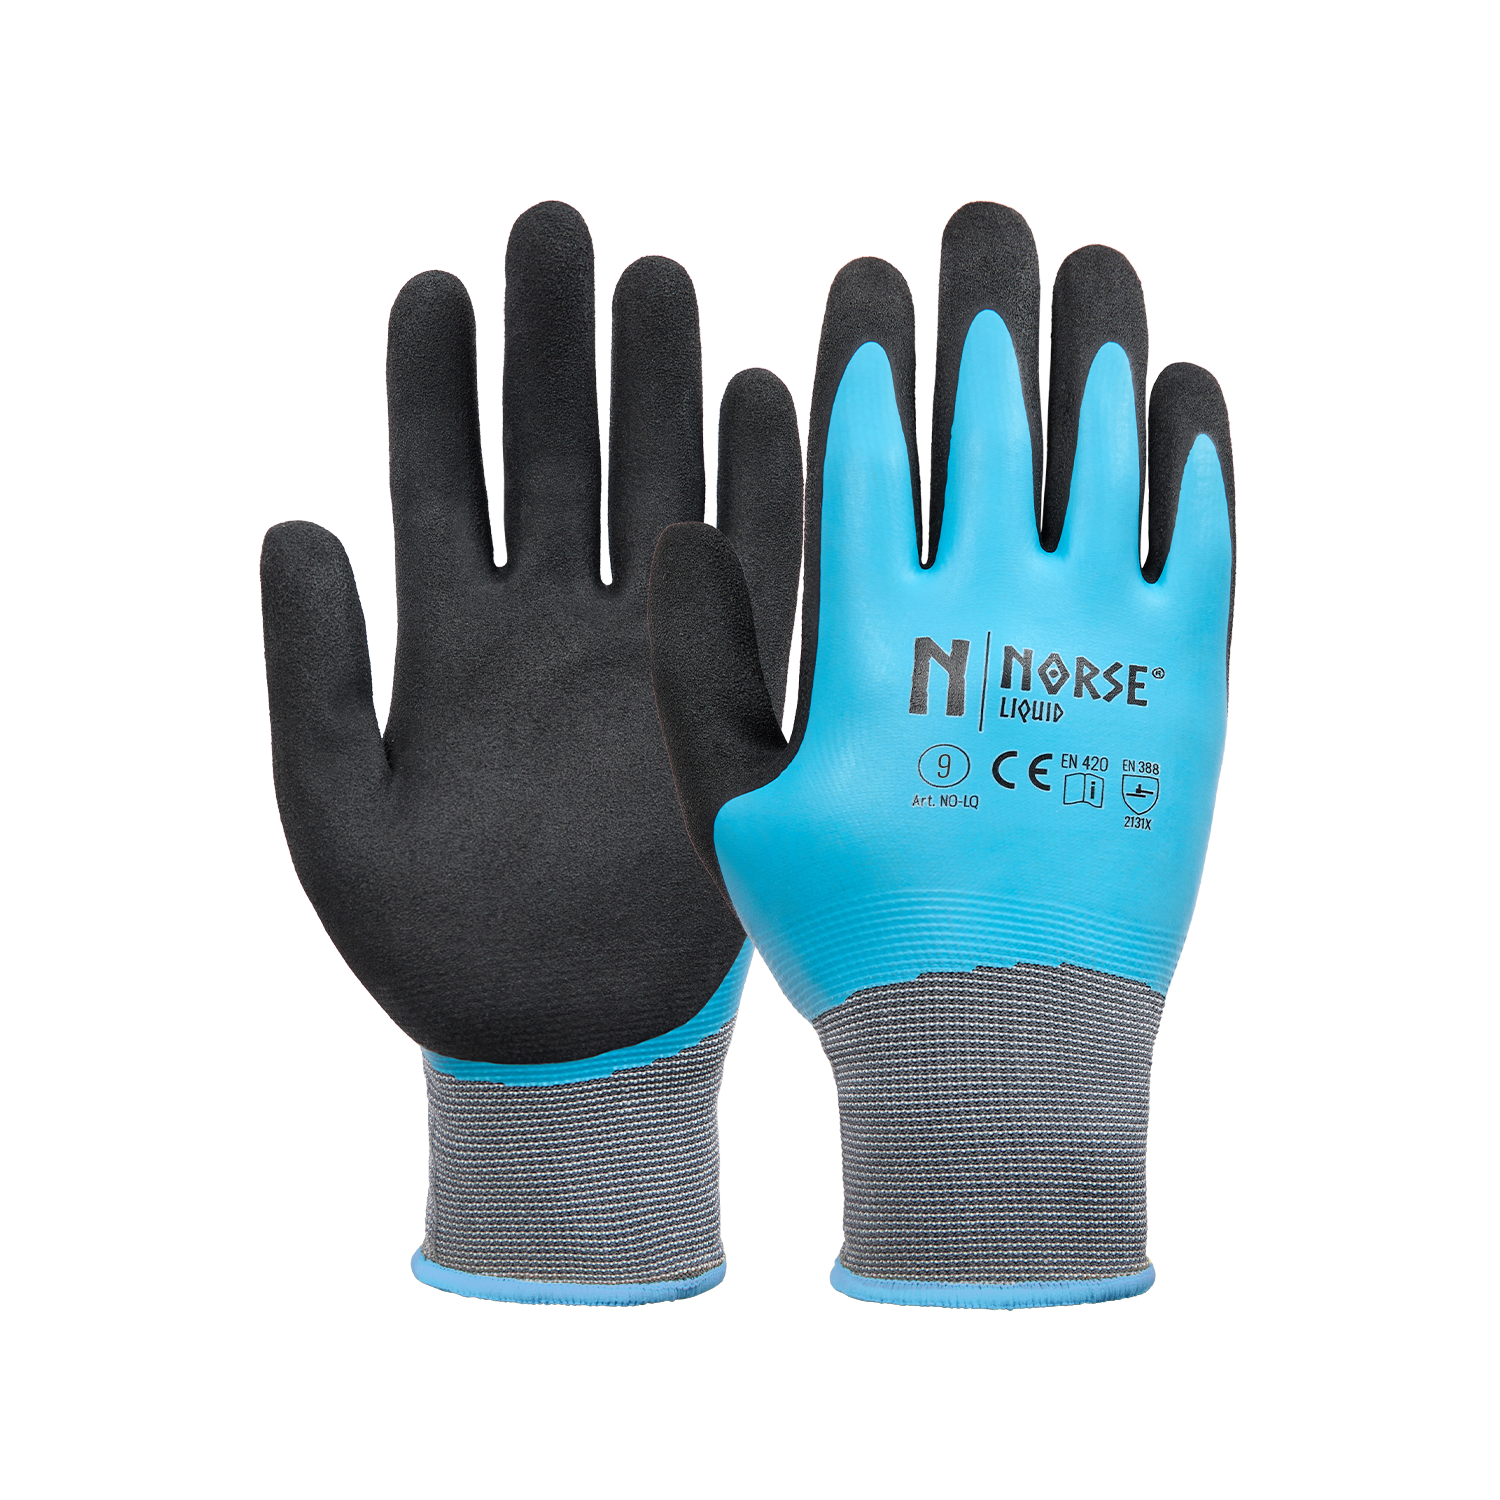 NORSE Liquid Waterproof assembly gloves size 7